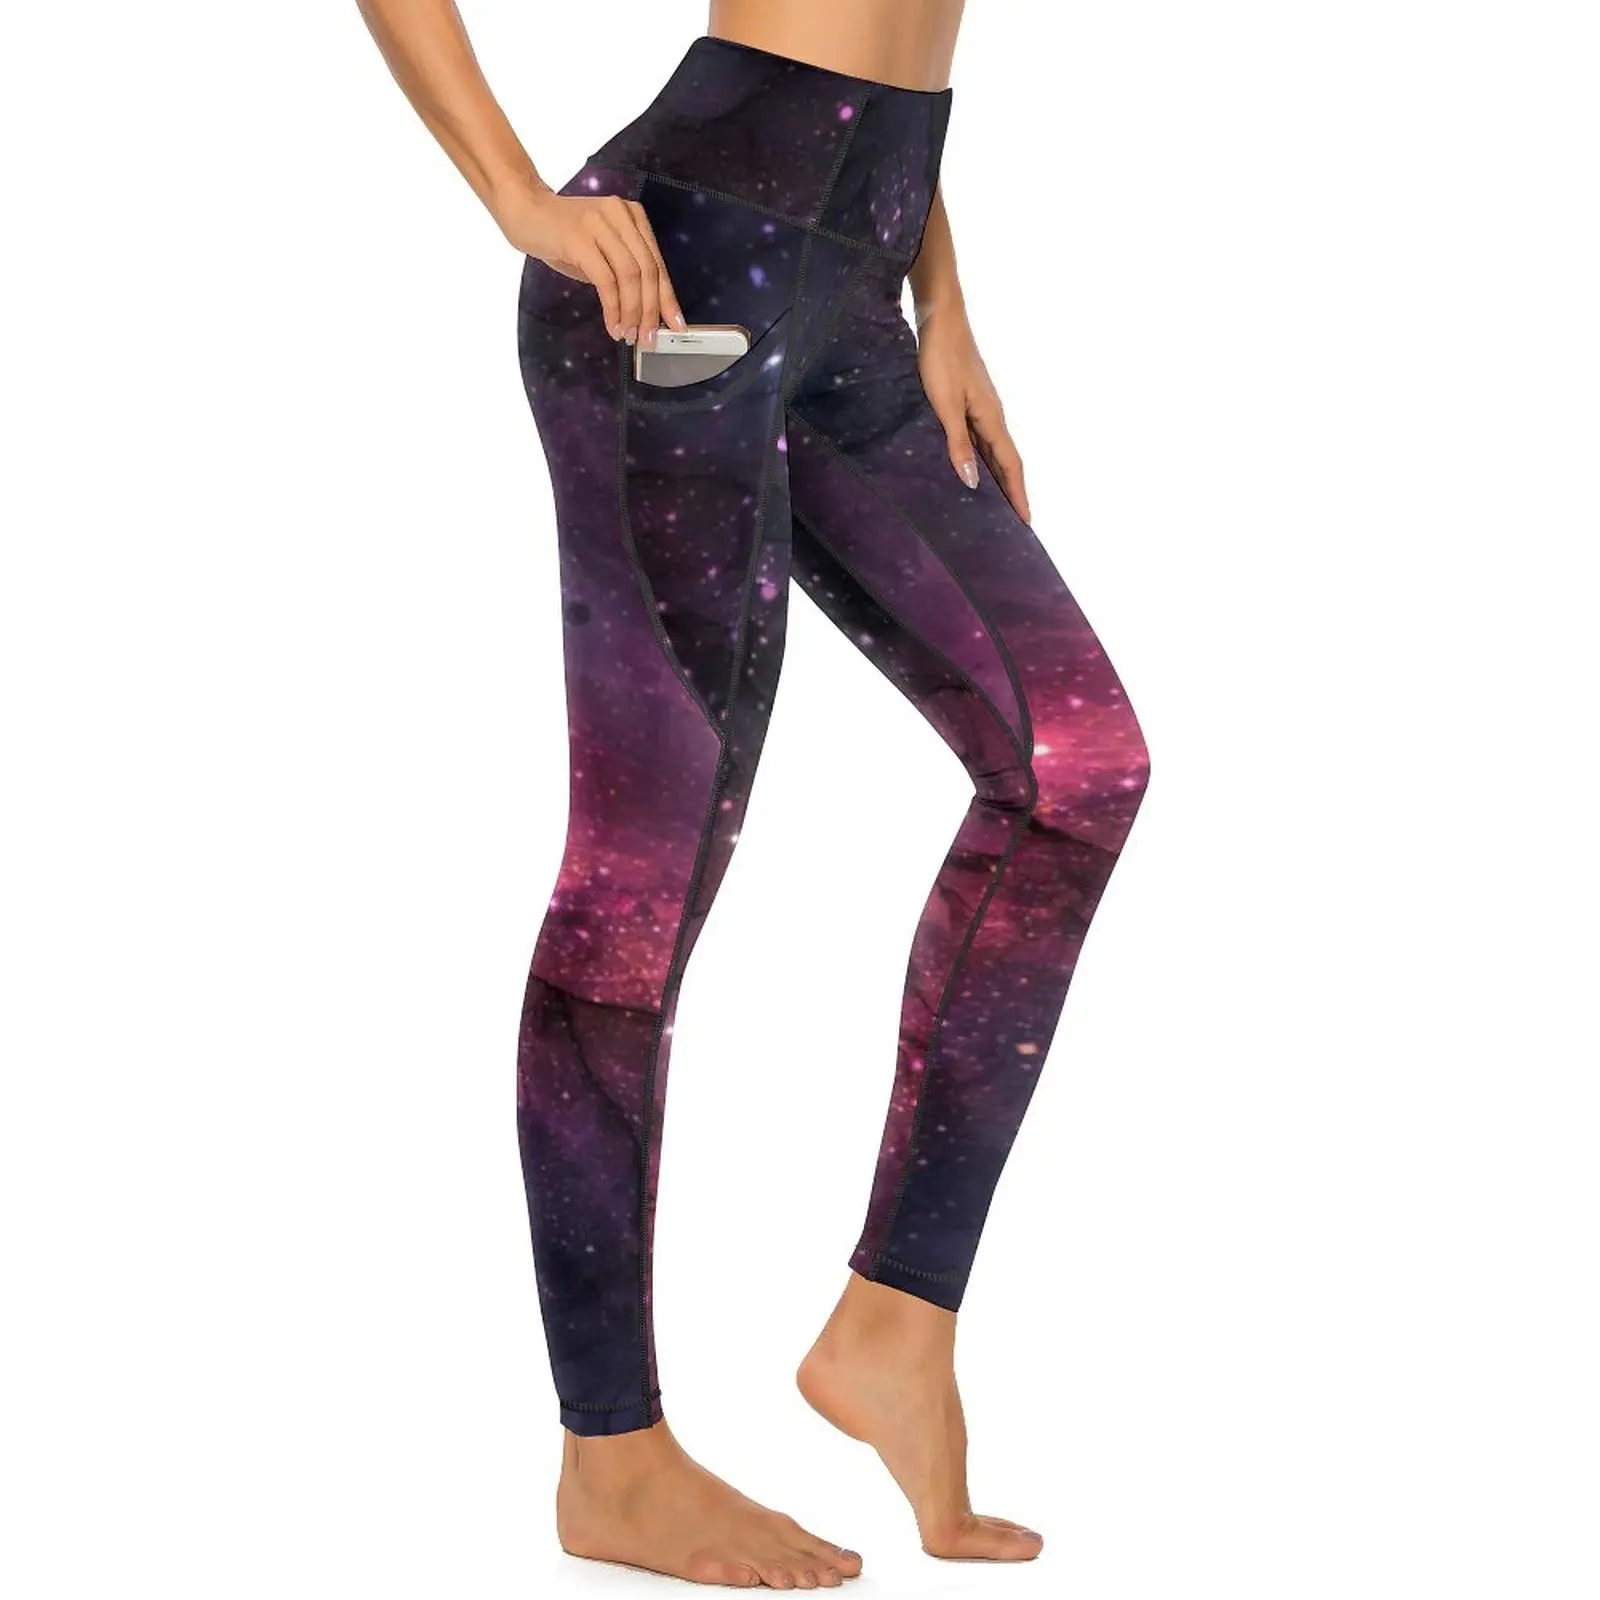 https://ae01.alicdn.com/kf/S38ab1ea9447c478896909c68f0d87ab0h/Starry-Star-Outer-Space-Leggings-Galaxy-Stars-Fitness-Gym-Yoga-Pants-Push-Up-Casual-Leggins-Sexy.jpg